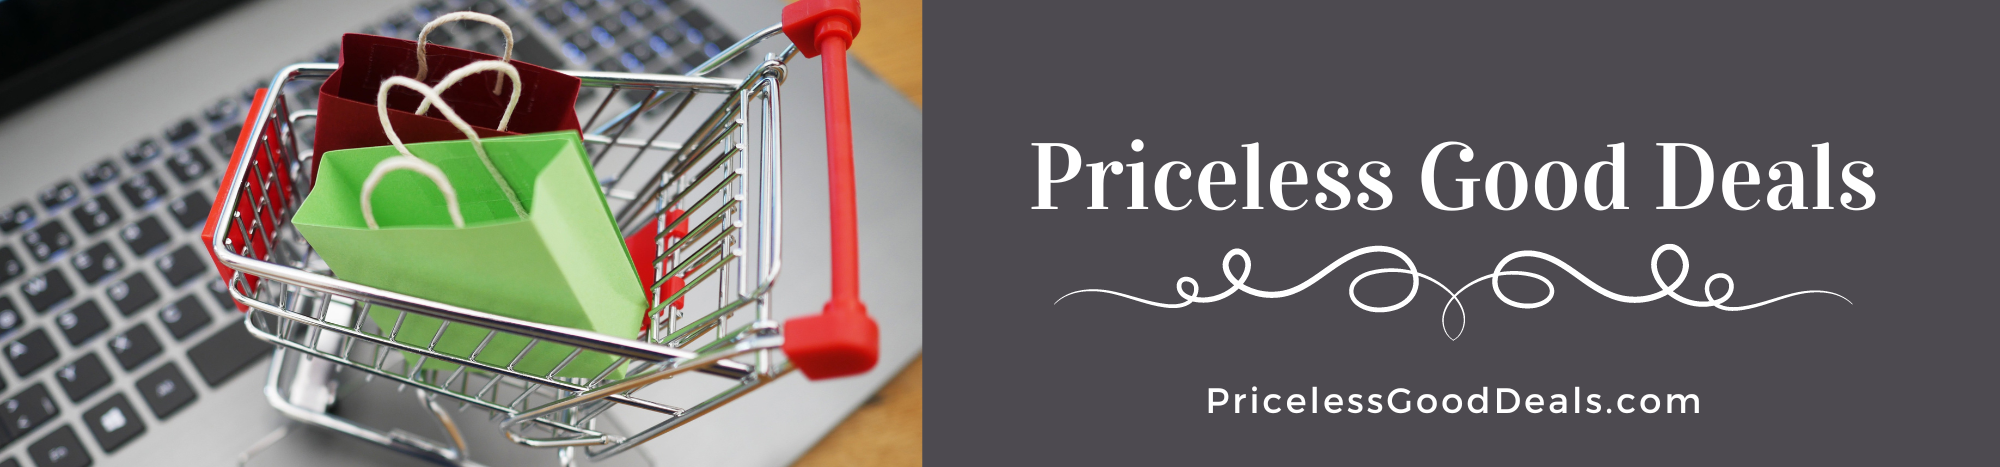 Priceless Good Deals: Save Money on Everyday Items